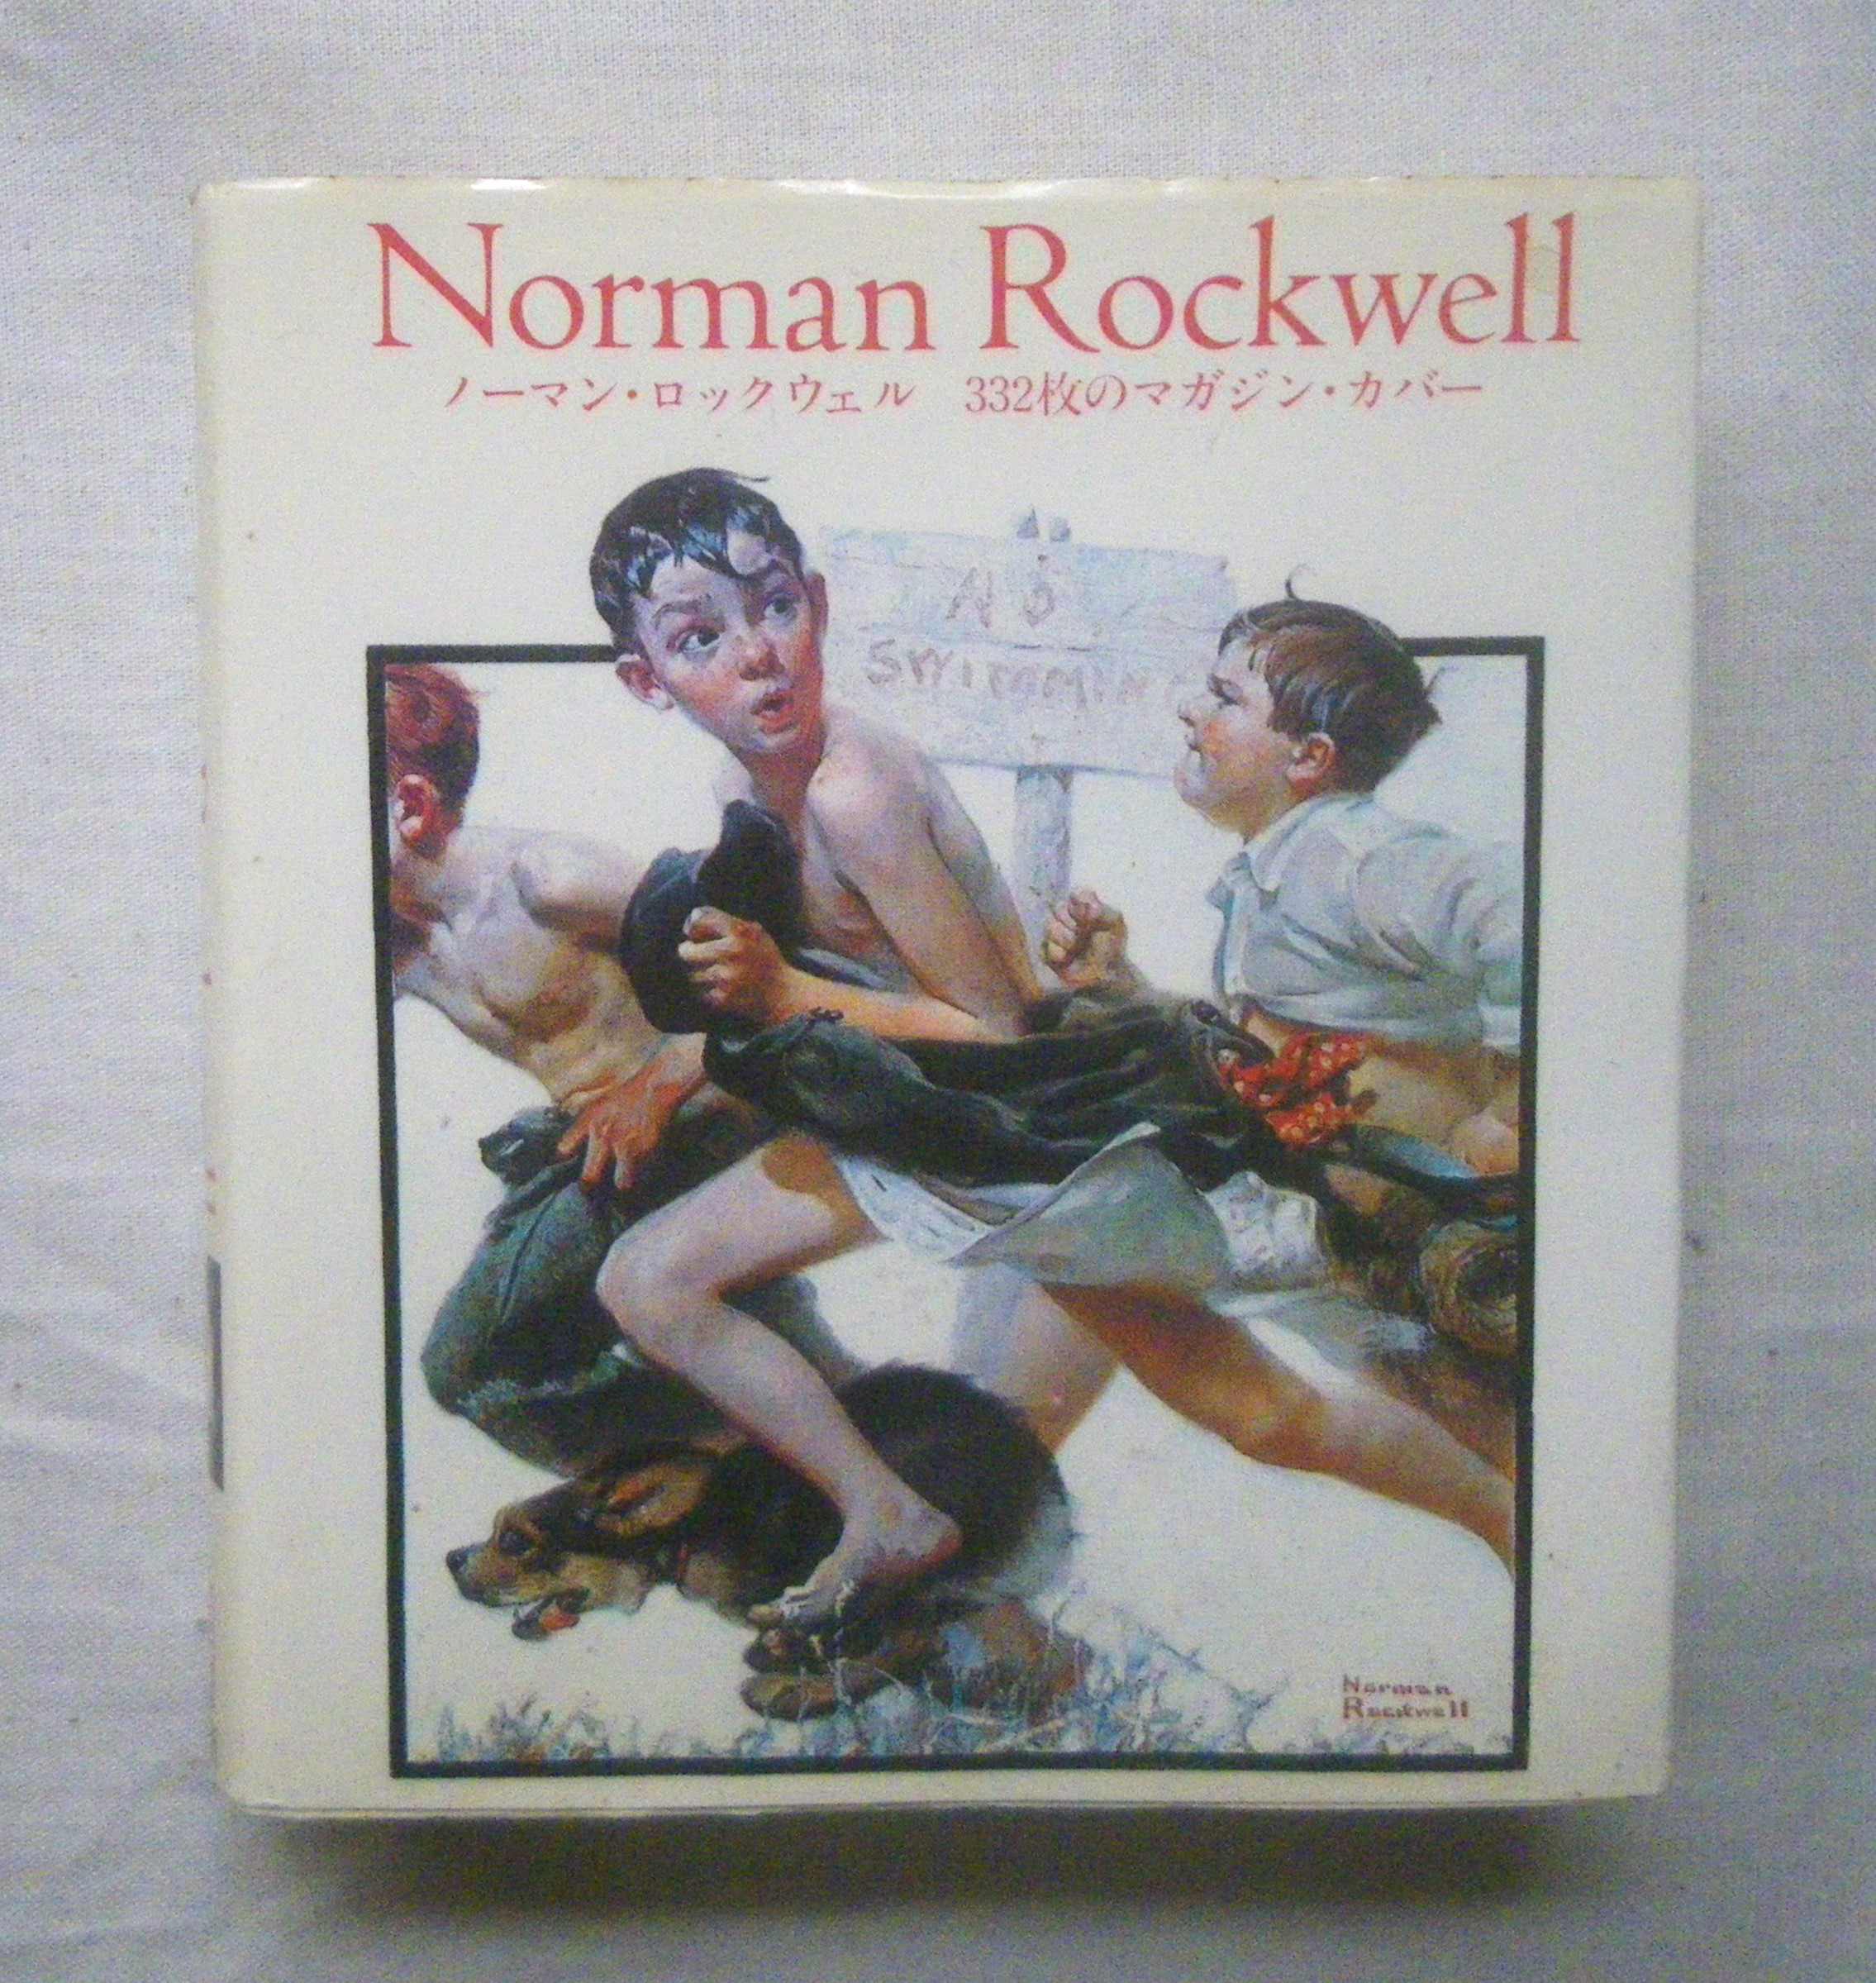 Norman Rock well book 洋書 ノーマンロックウェル - 洋書